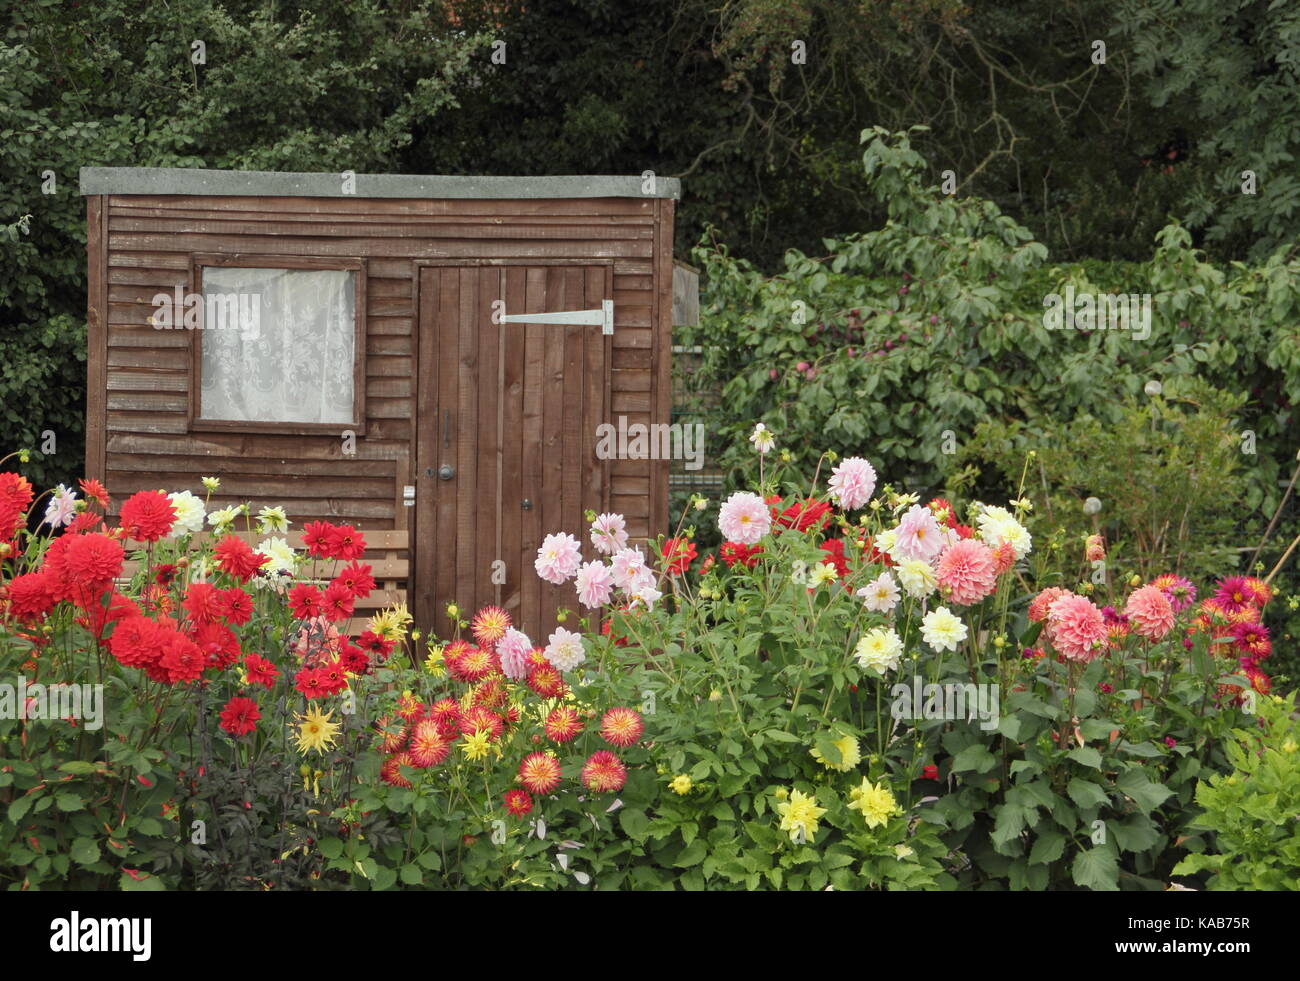 Dahlia blooms including Bargaly Blush and Weston Spanish Dancer, flowering in front of a shed in an English allotment garden in late summer Stock Photo